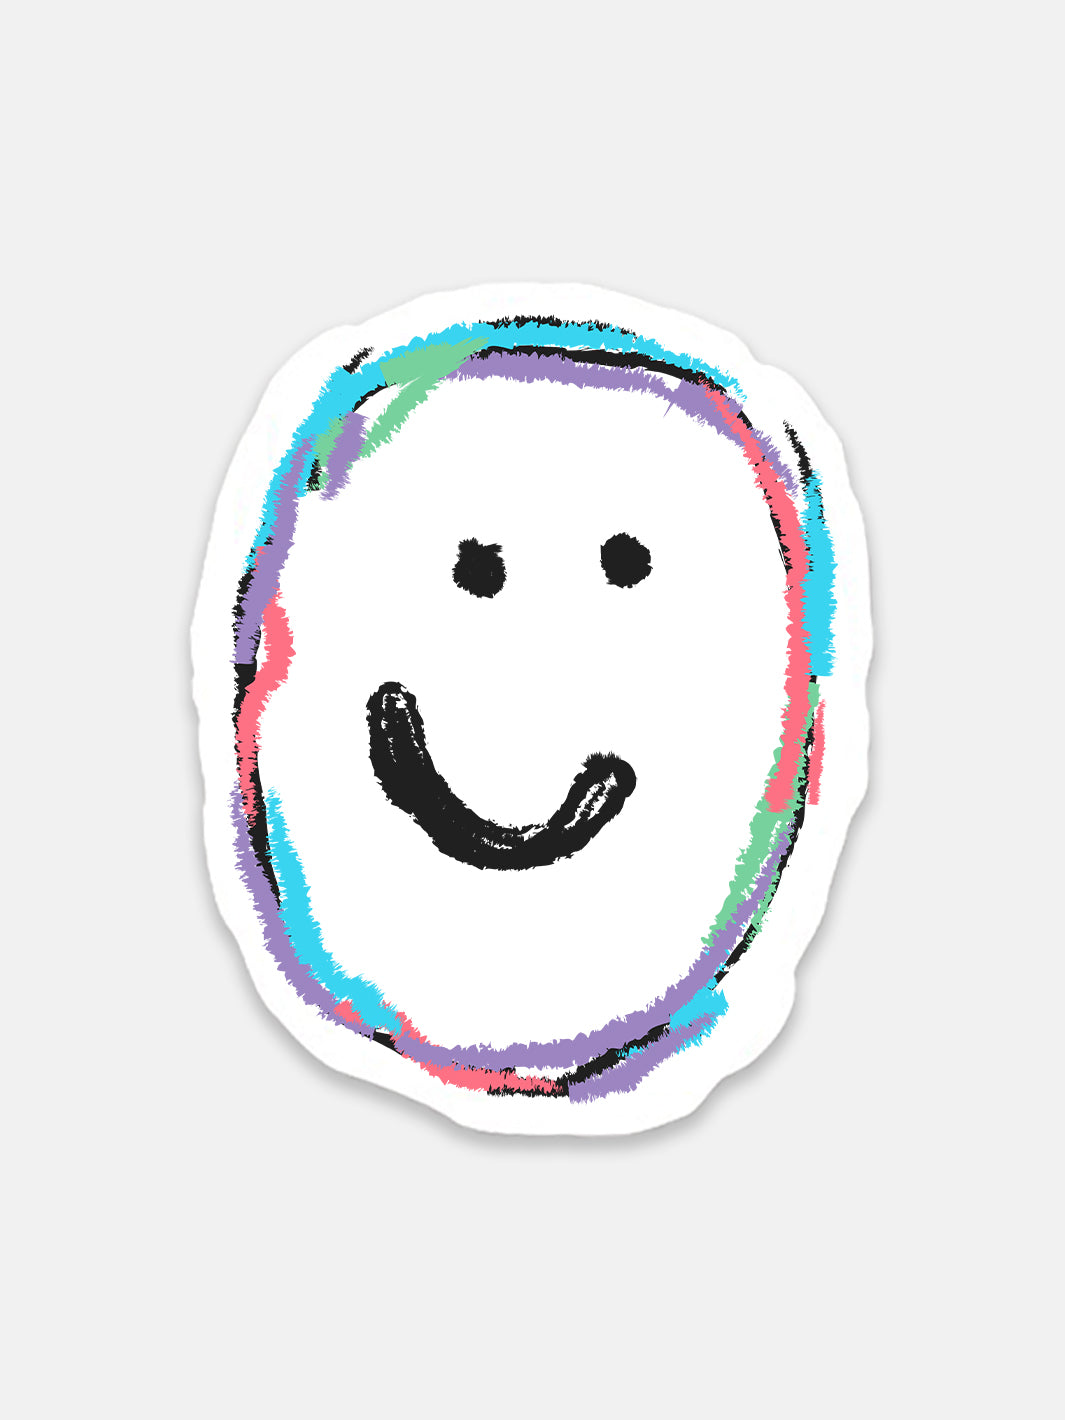 Happiness Sticker Pack 2